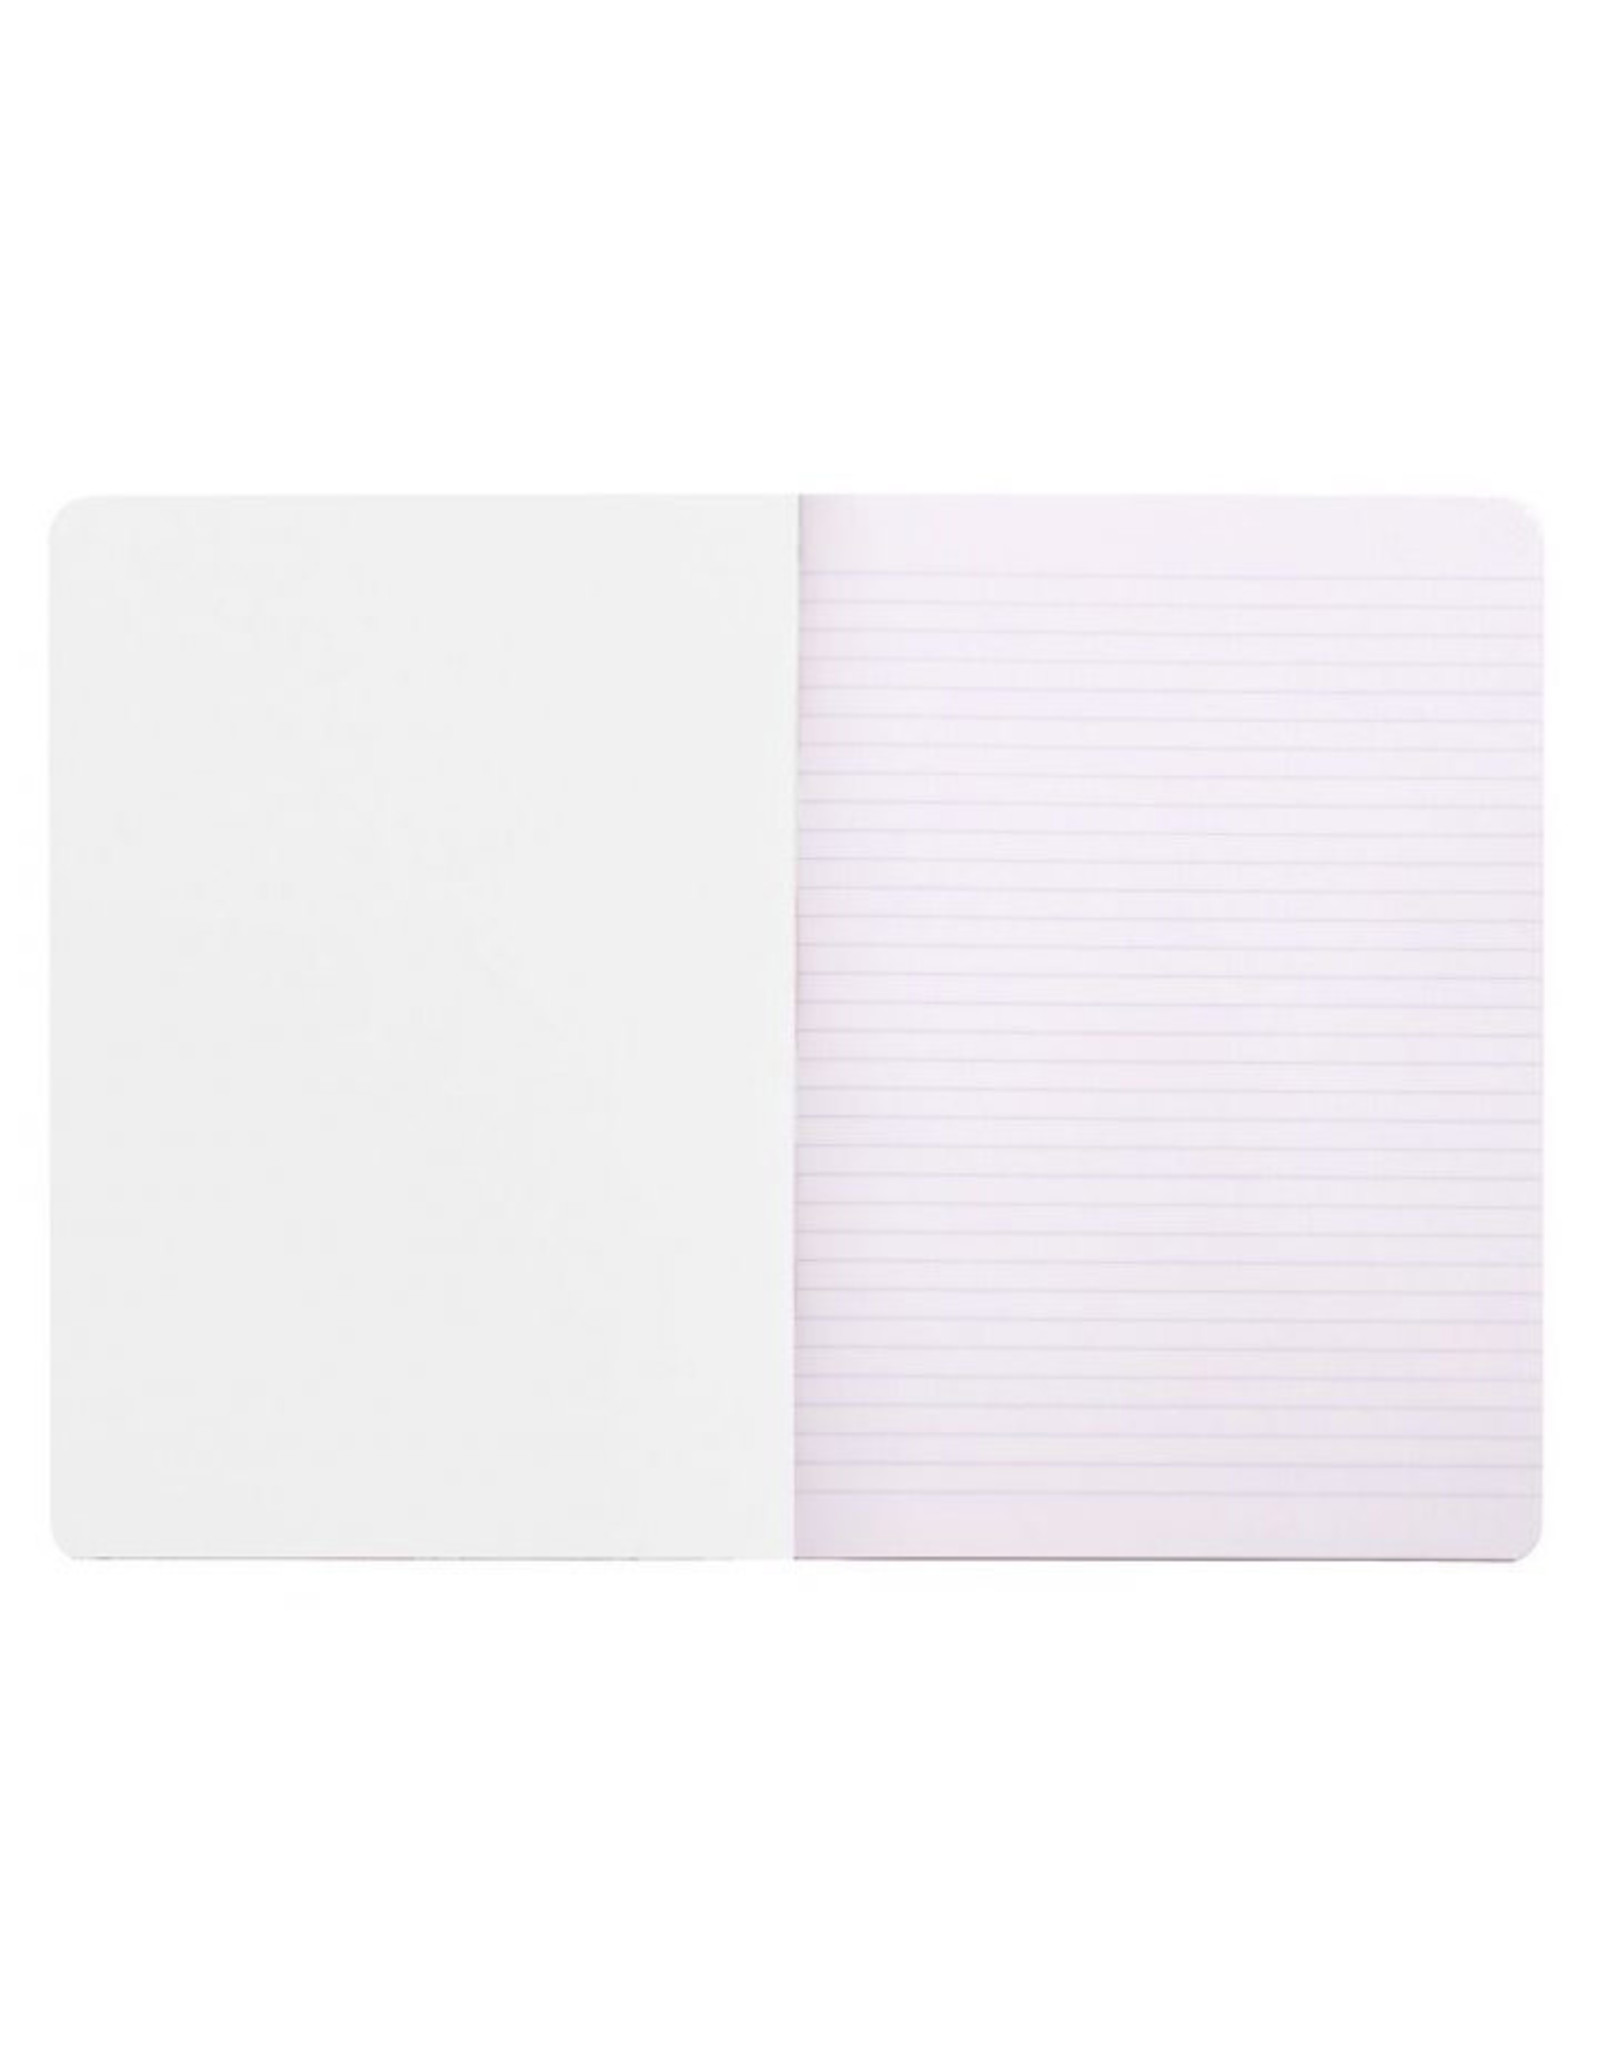 Rhodia White ICE Lined Classic Notebook 6 x 8.25